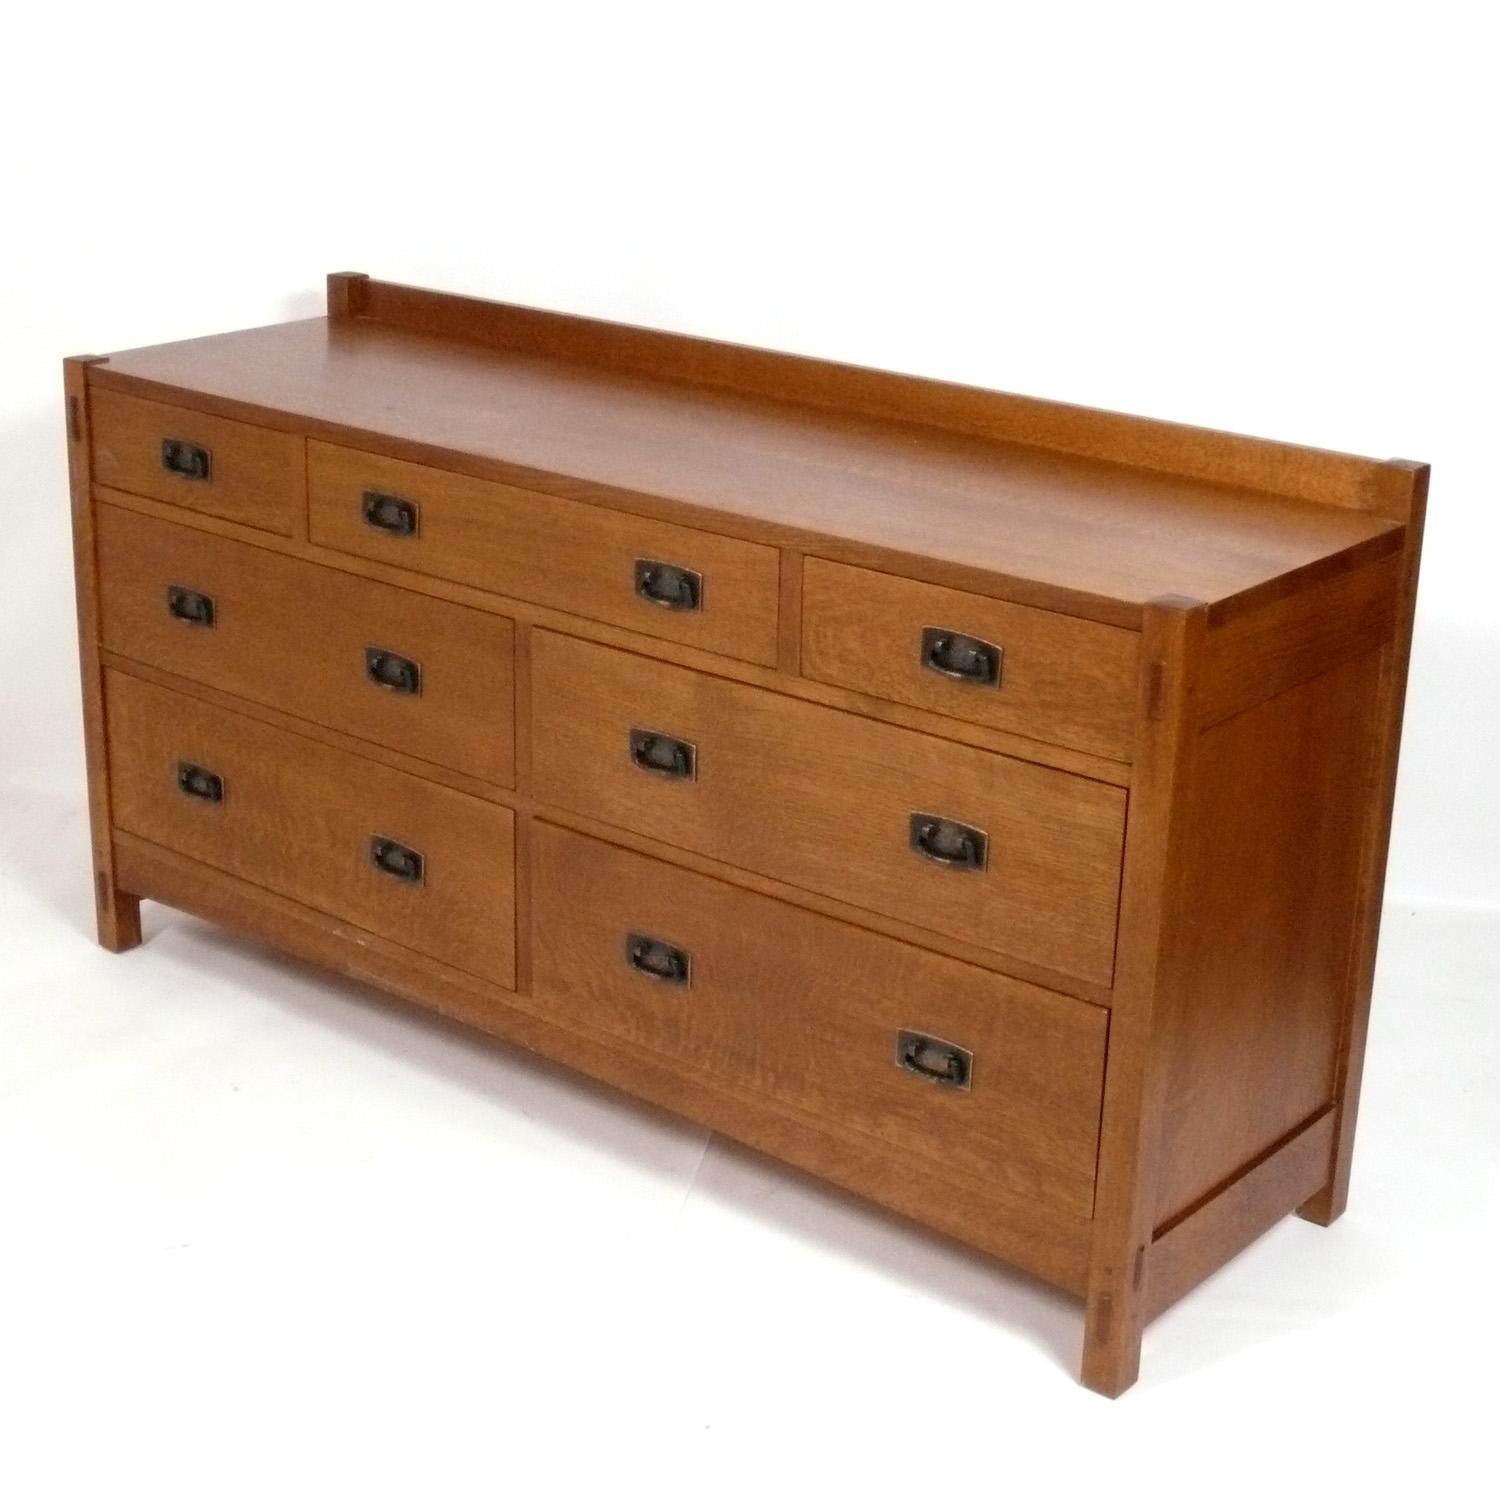 Clean Lined Stickley Chest or Dresser, originally designed in the 1910s by Gustav Stickley, this example is part of the authorized line produced by Stickley in the 2000s. Like all Stickley furniture, this piece is extremely well made with pegged,